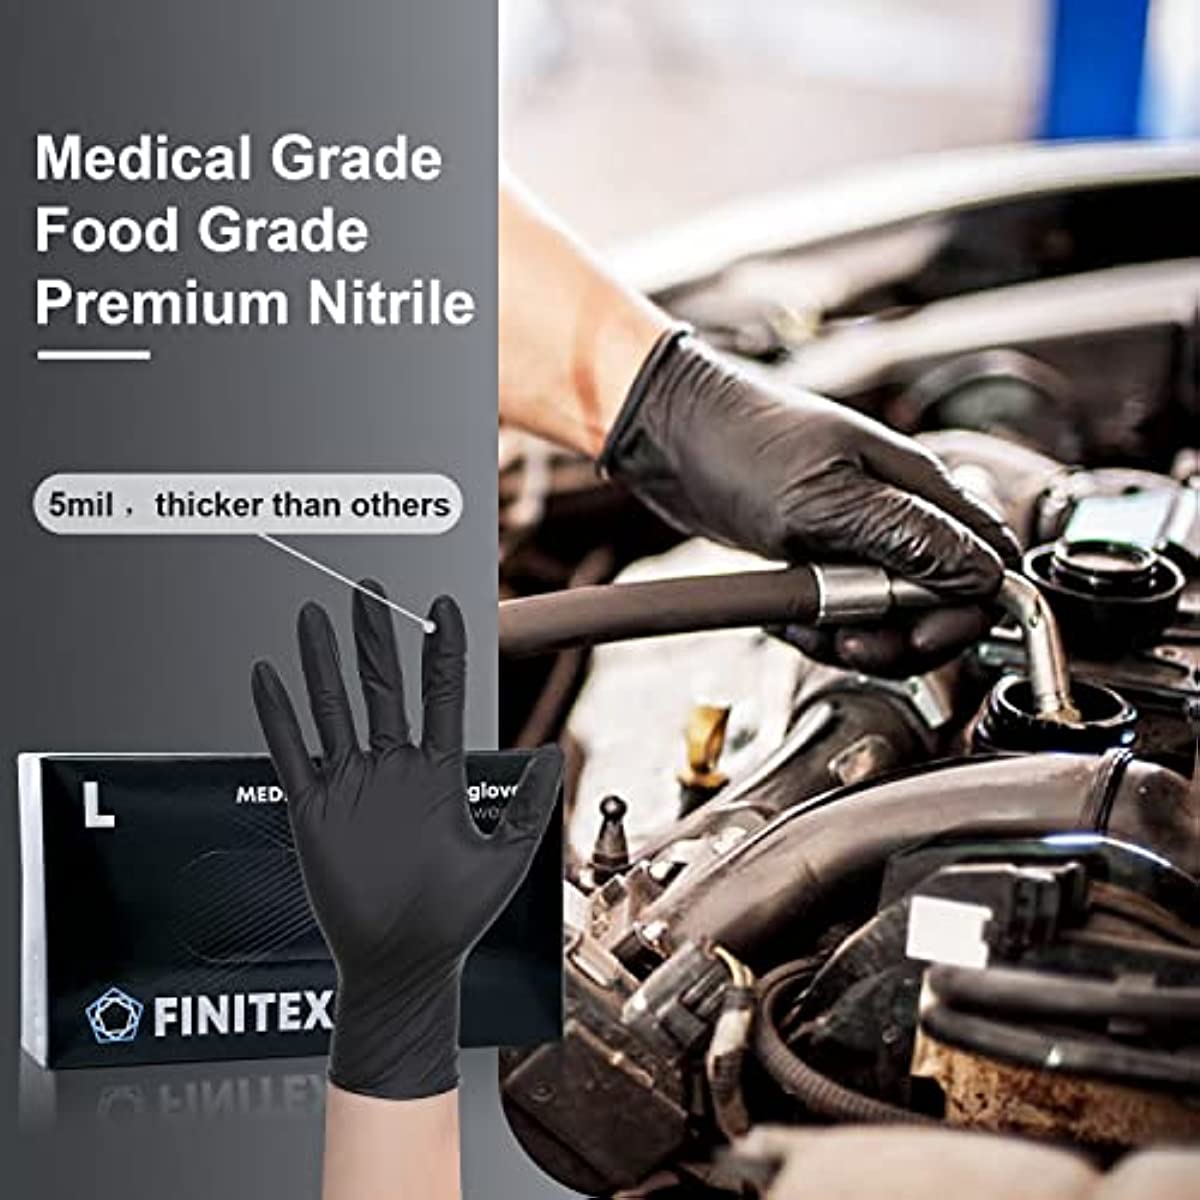 FINITEX - Black Nitrile Disposable Gloves, 5mil, Powder-free, Medical Exam Gloves Latex-Free 100 PCS For Cleaning Food Gloves (Large)